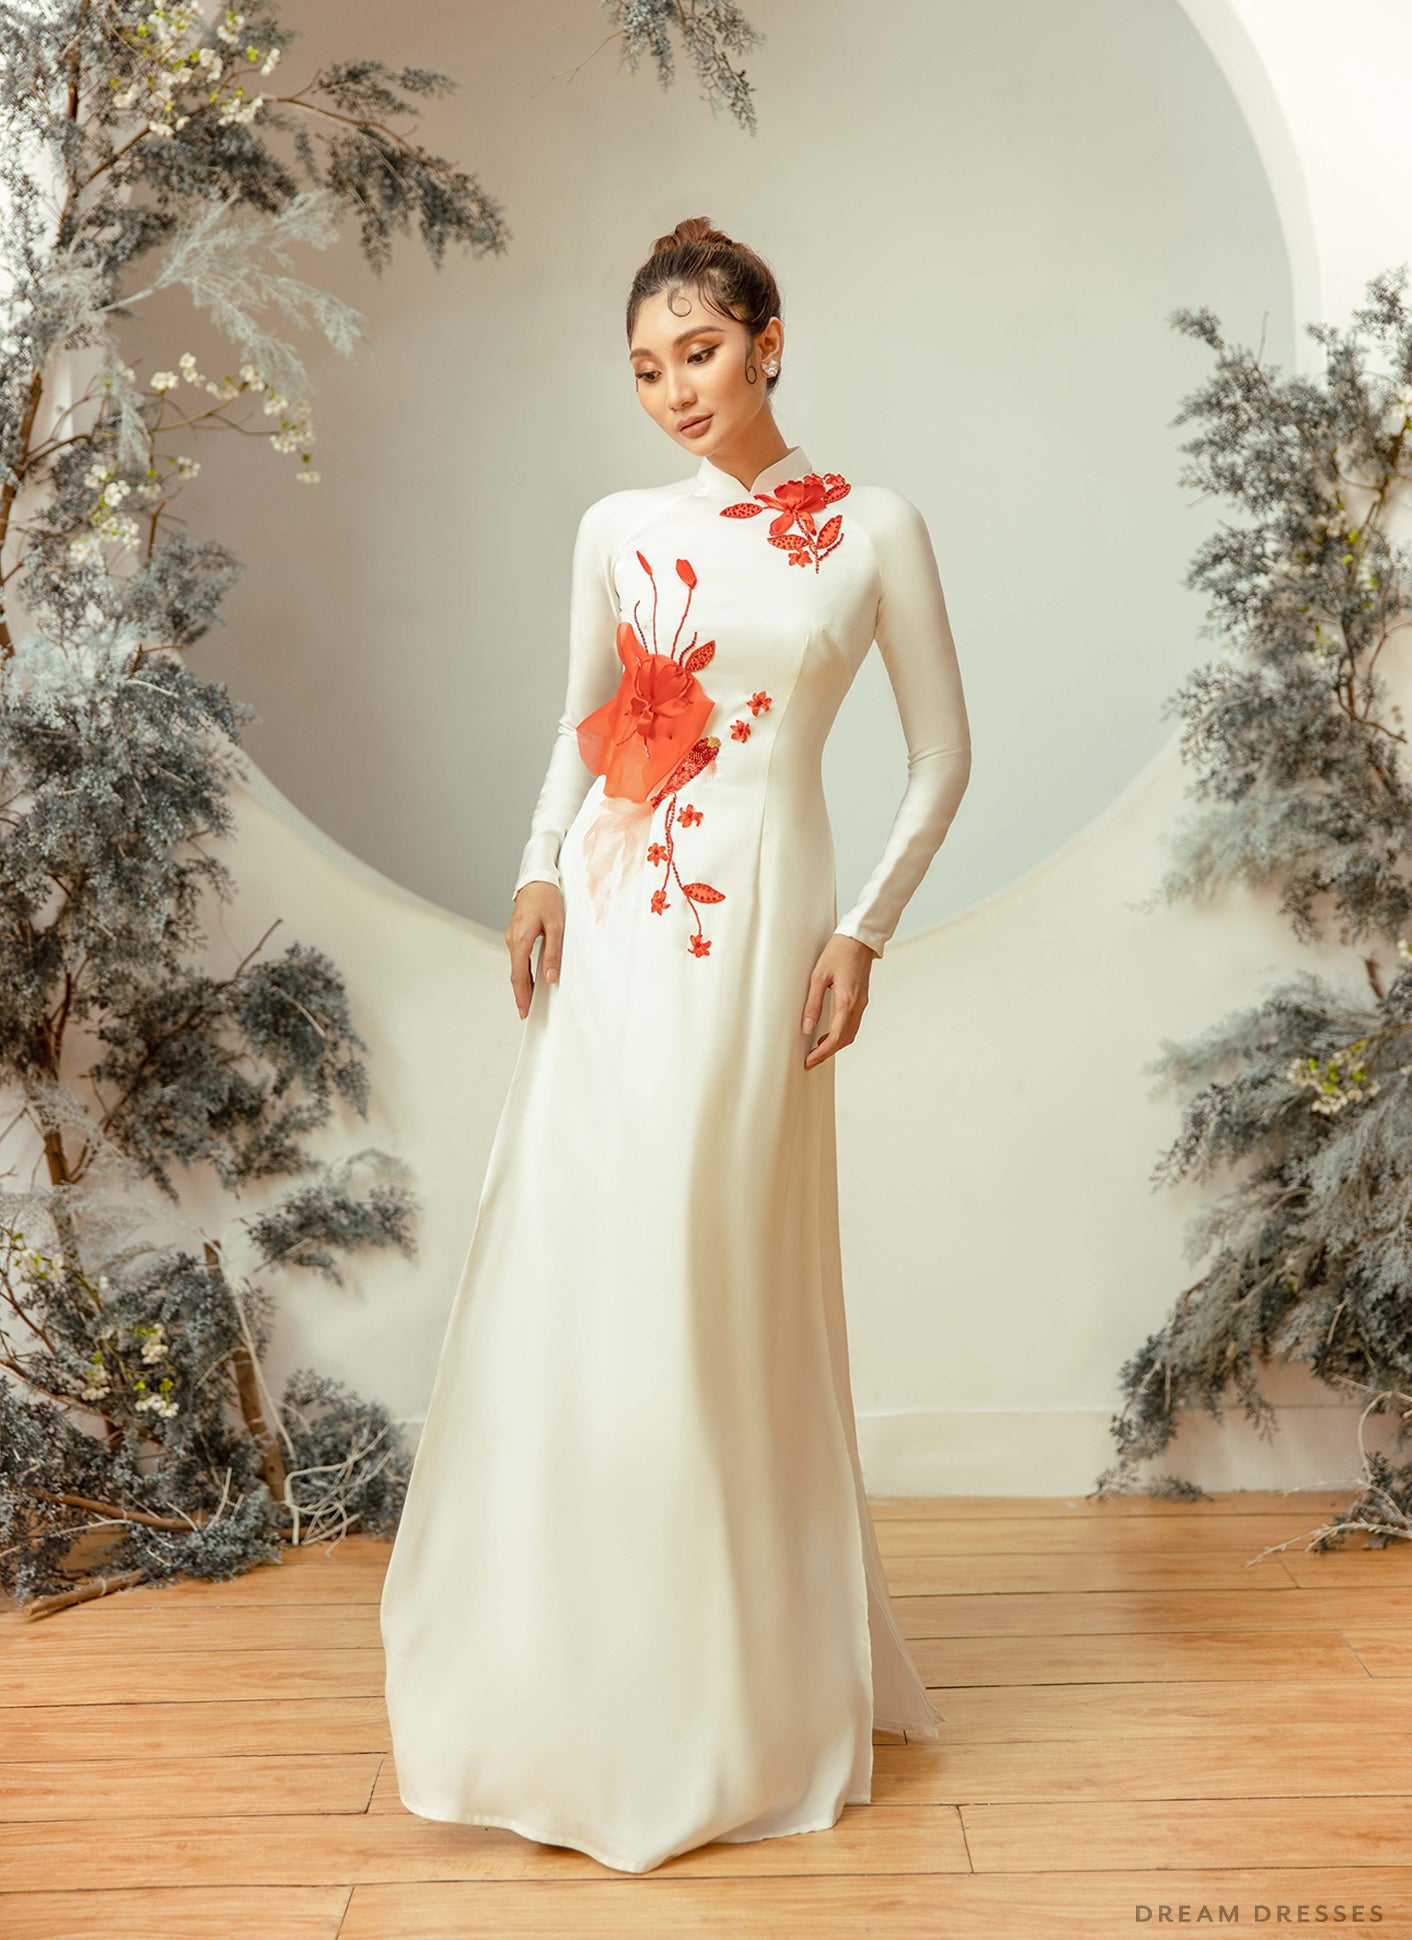 Vintage One Shoulder One Shoulder Wedding Dress With Lace Up Corset And 3D  Floral Applique In White And Red From Readygogo, $158.8 | DHgate.Com